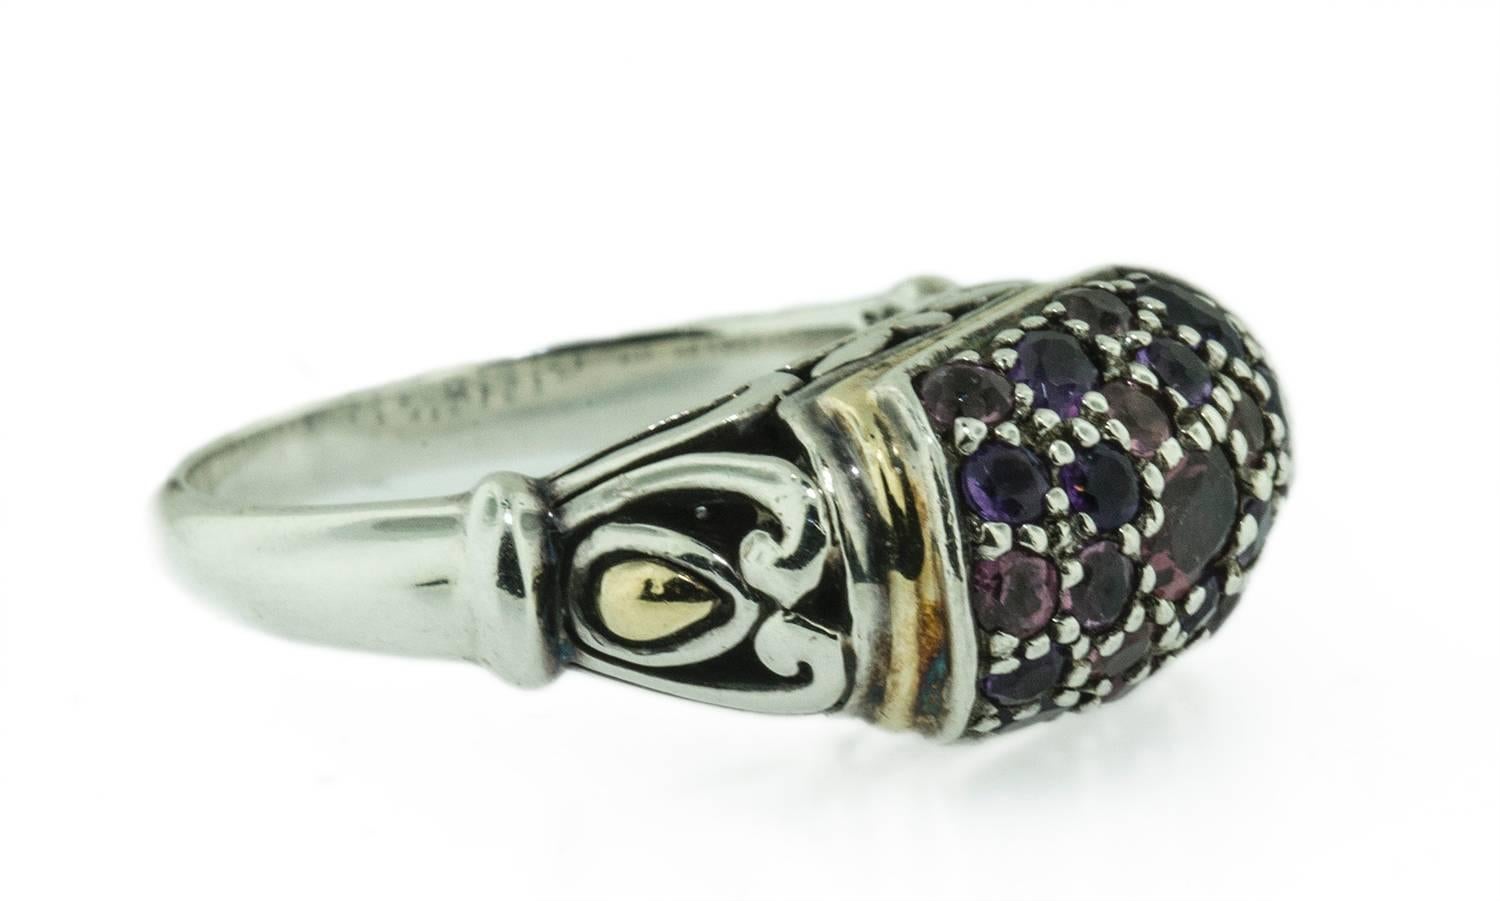 This beautifully designed ring is made by John Hardy. It is set in 18 KT gold and silver. It hold twenty two faceted garnets which are bead set. The workmanship of the mount is beautiful, which is typical of this exceptional designers work. The ring